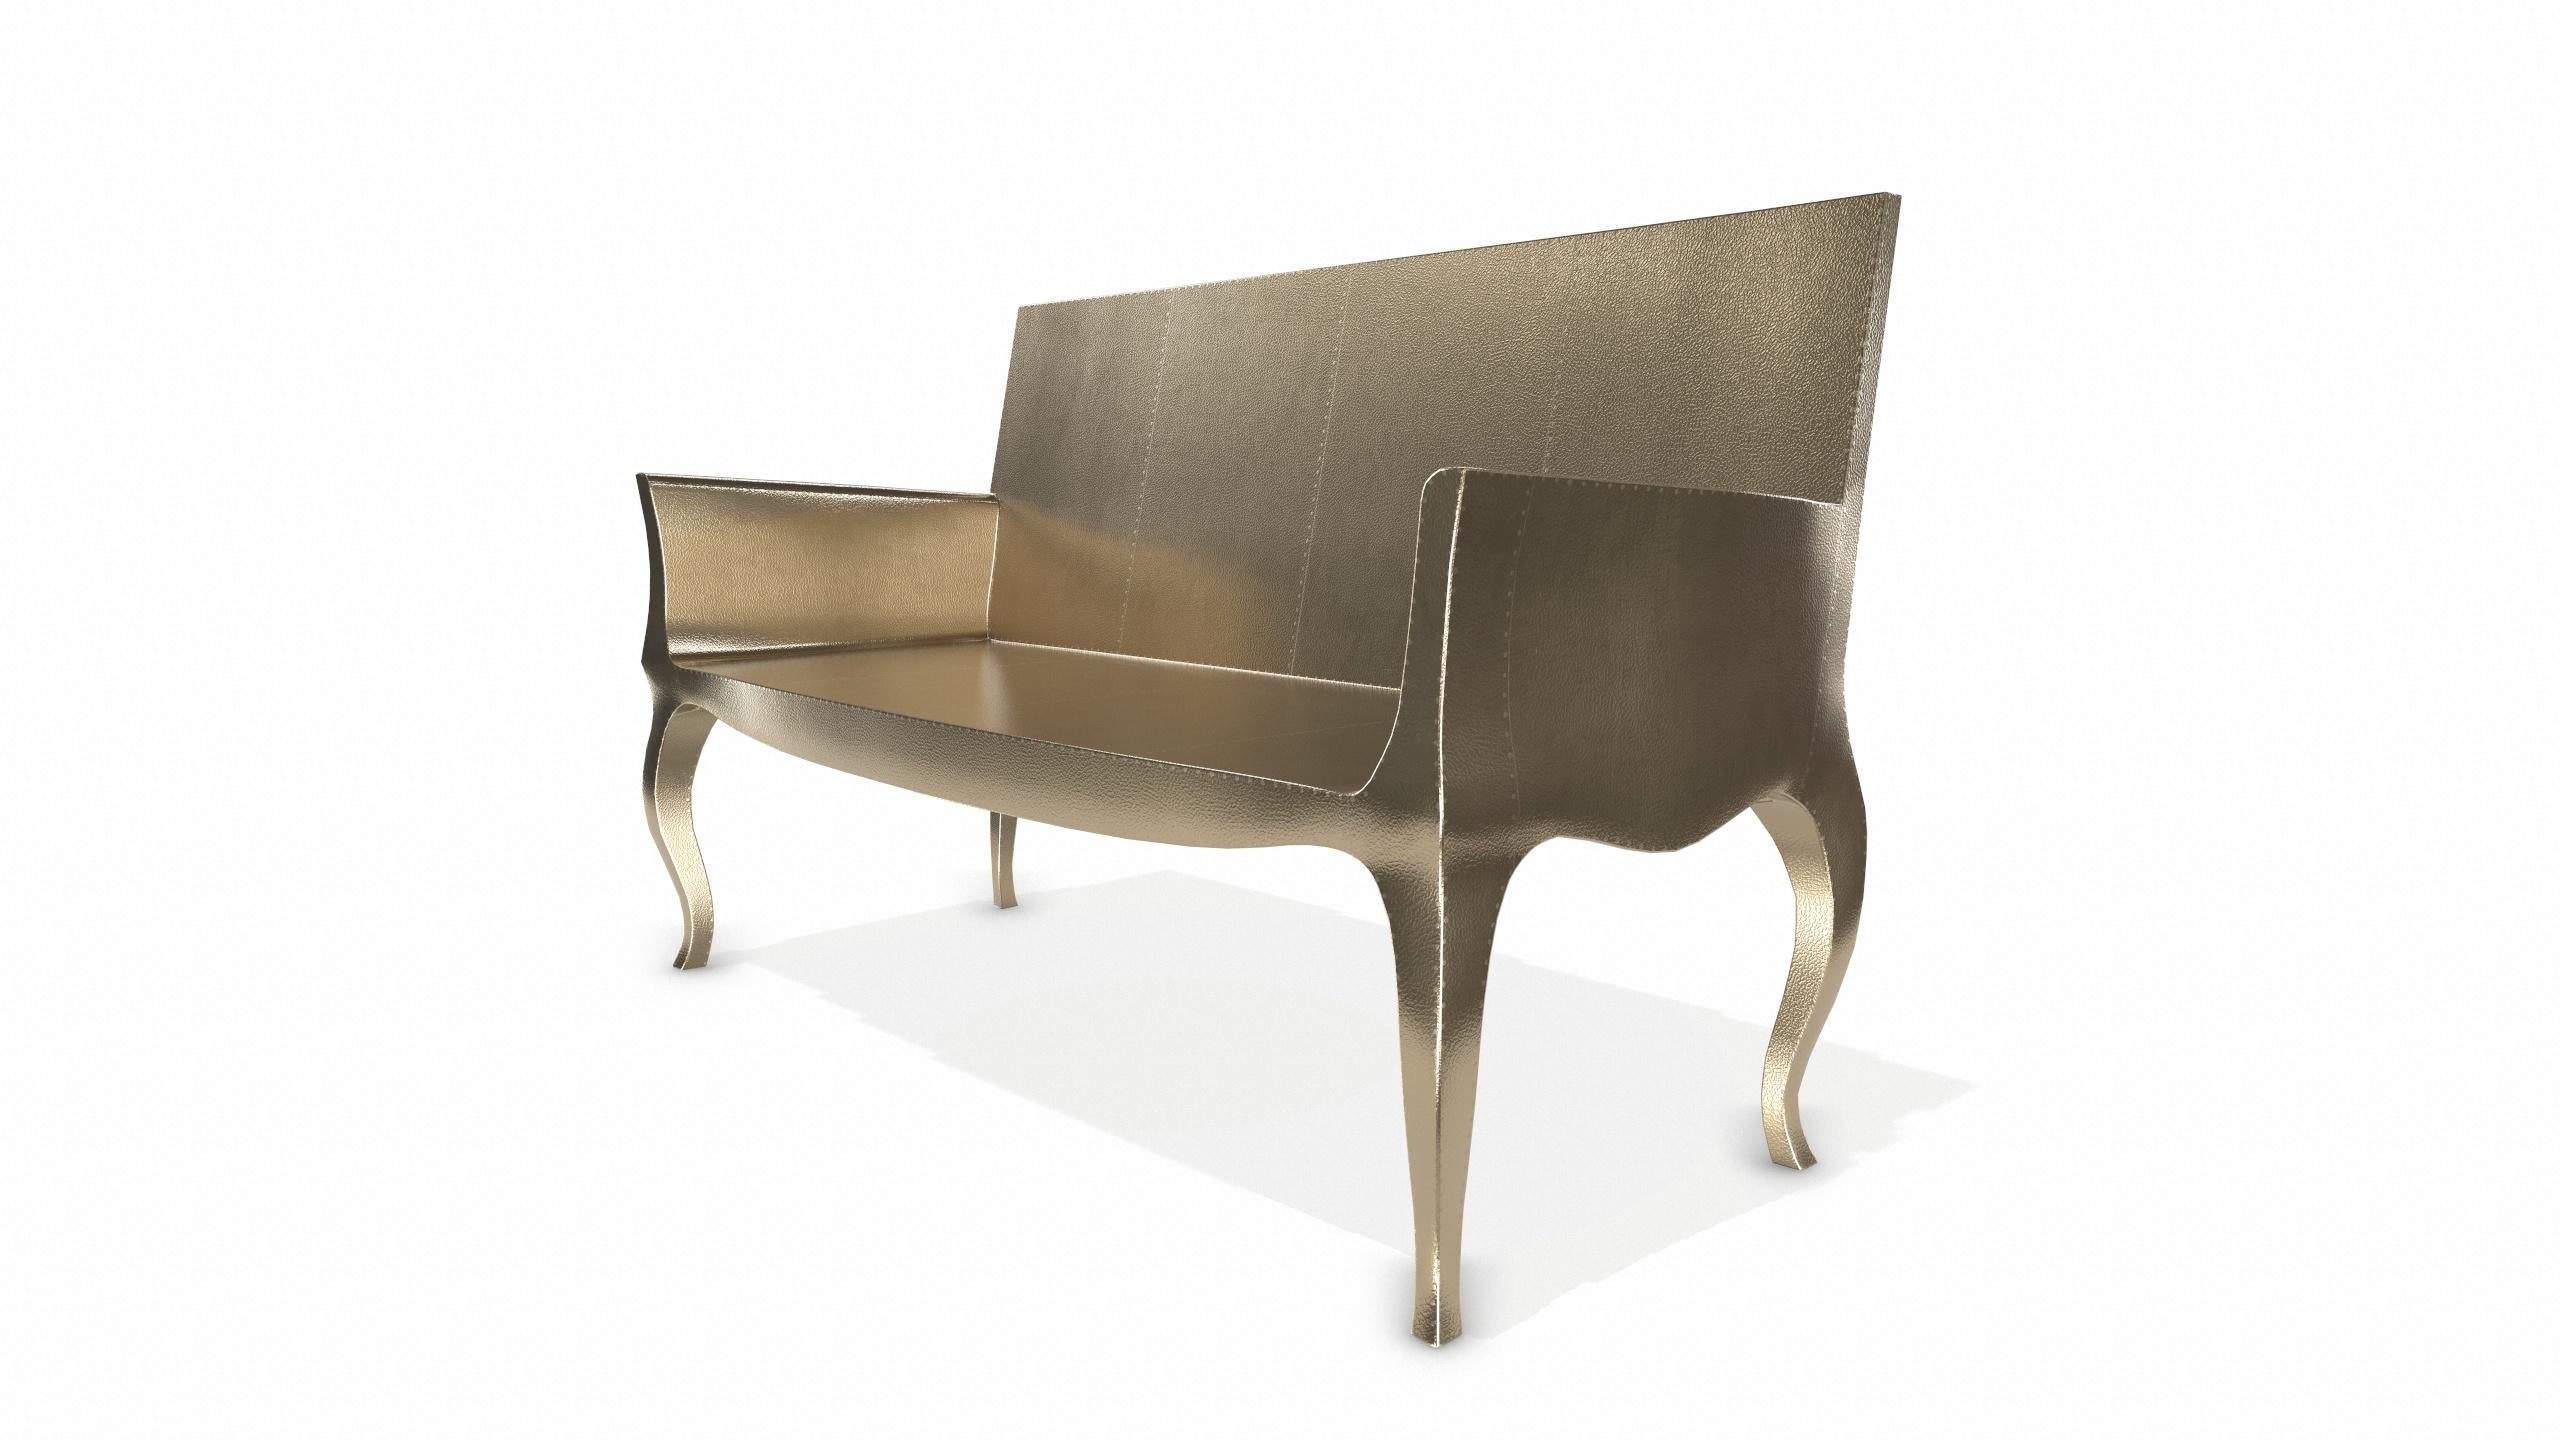 Contemporary Louise Settee Art Deco Chaise Longues in Fine Hammered Brass by Paul Mathieu For Sale